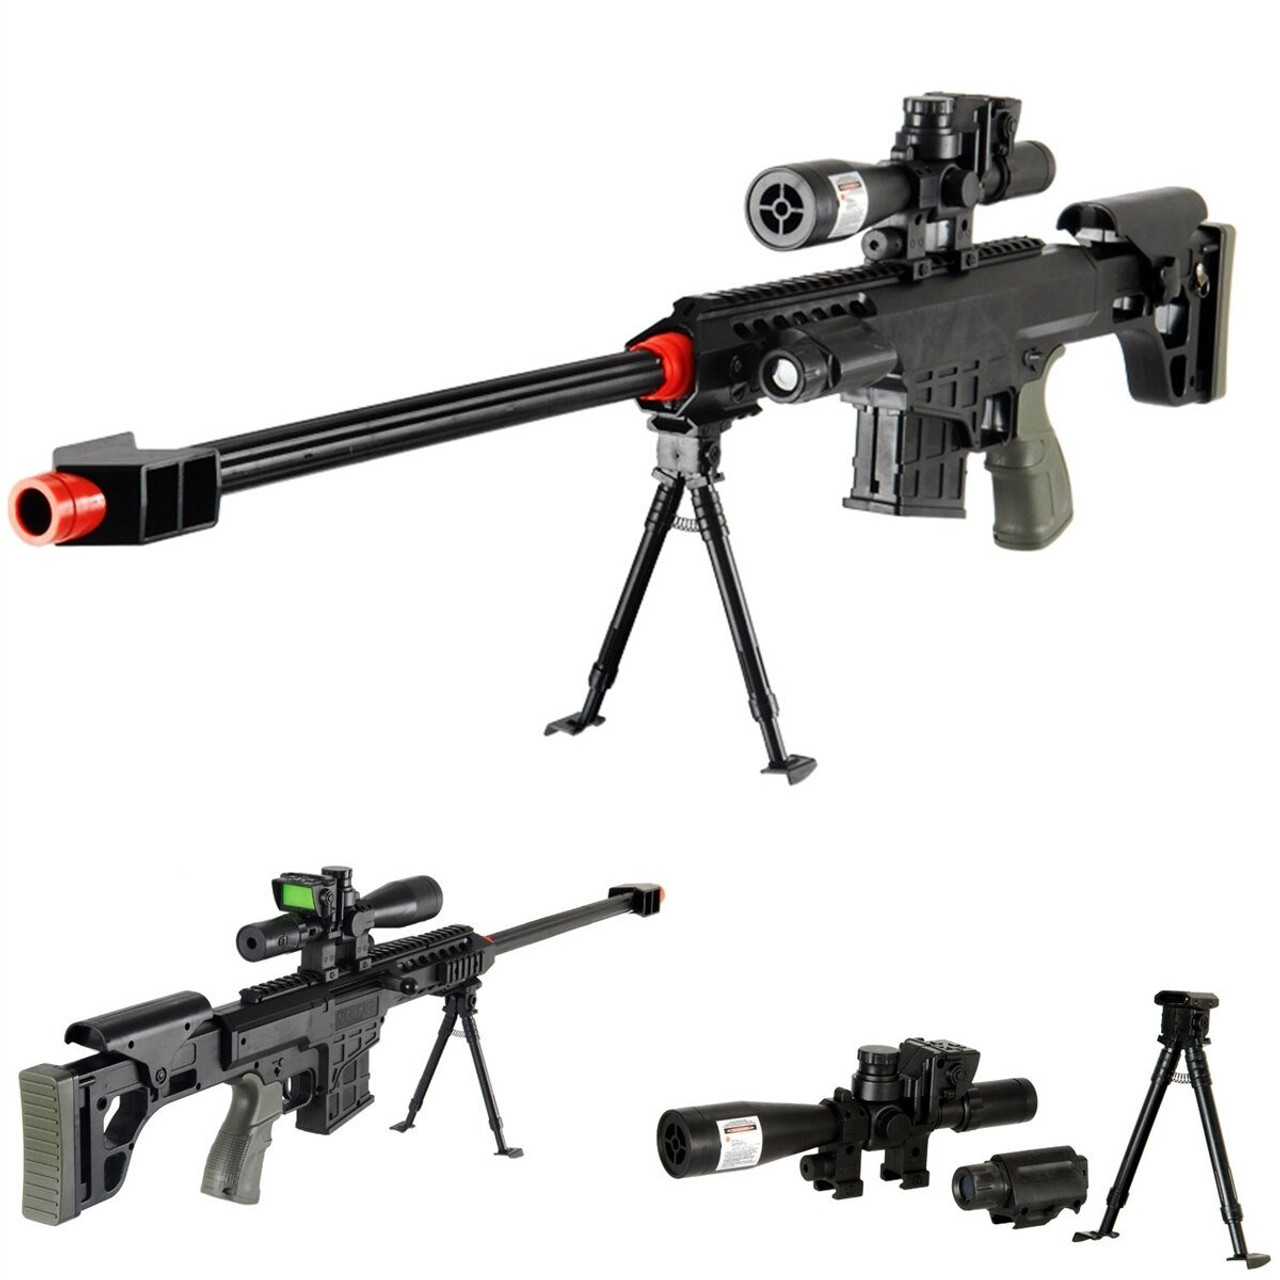 Airsoft Sniper Rifle M82a1 P1082 Only 28 95